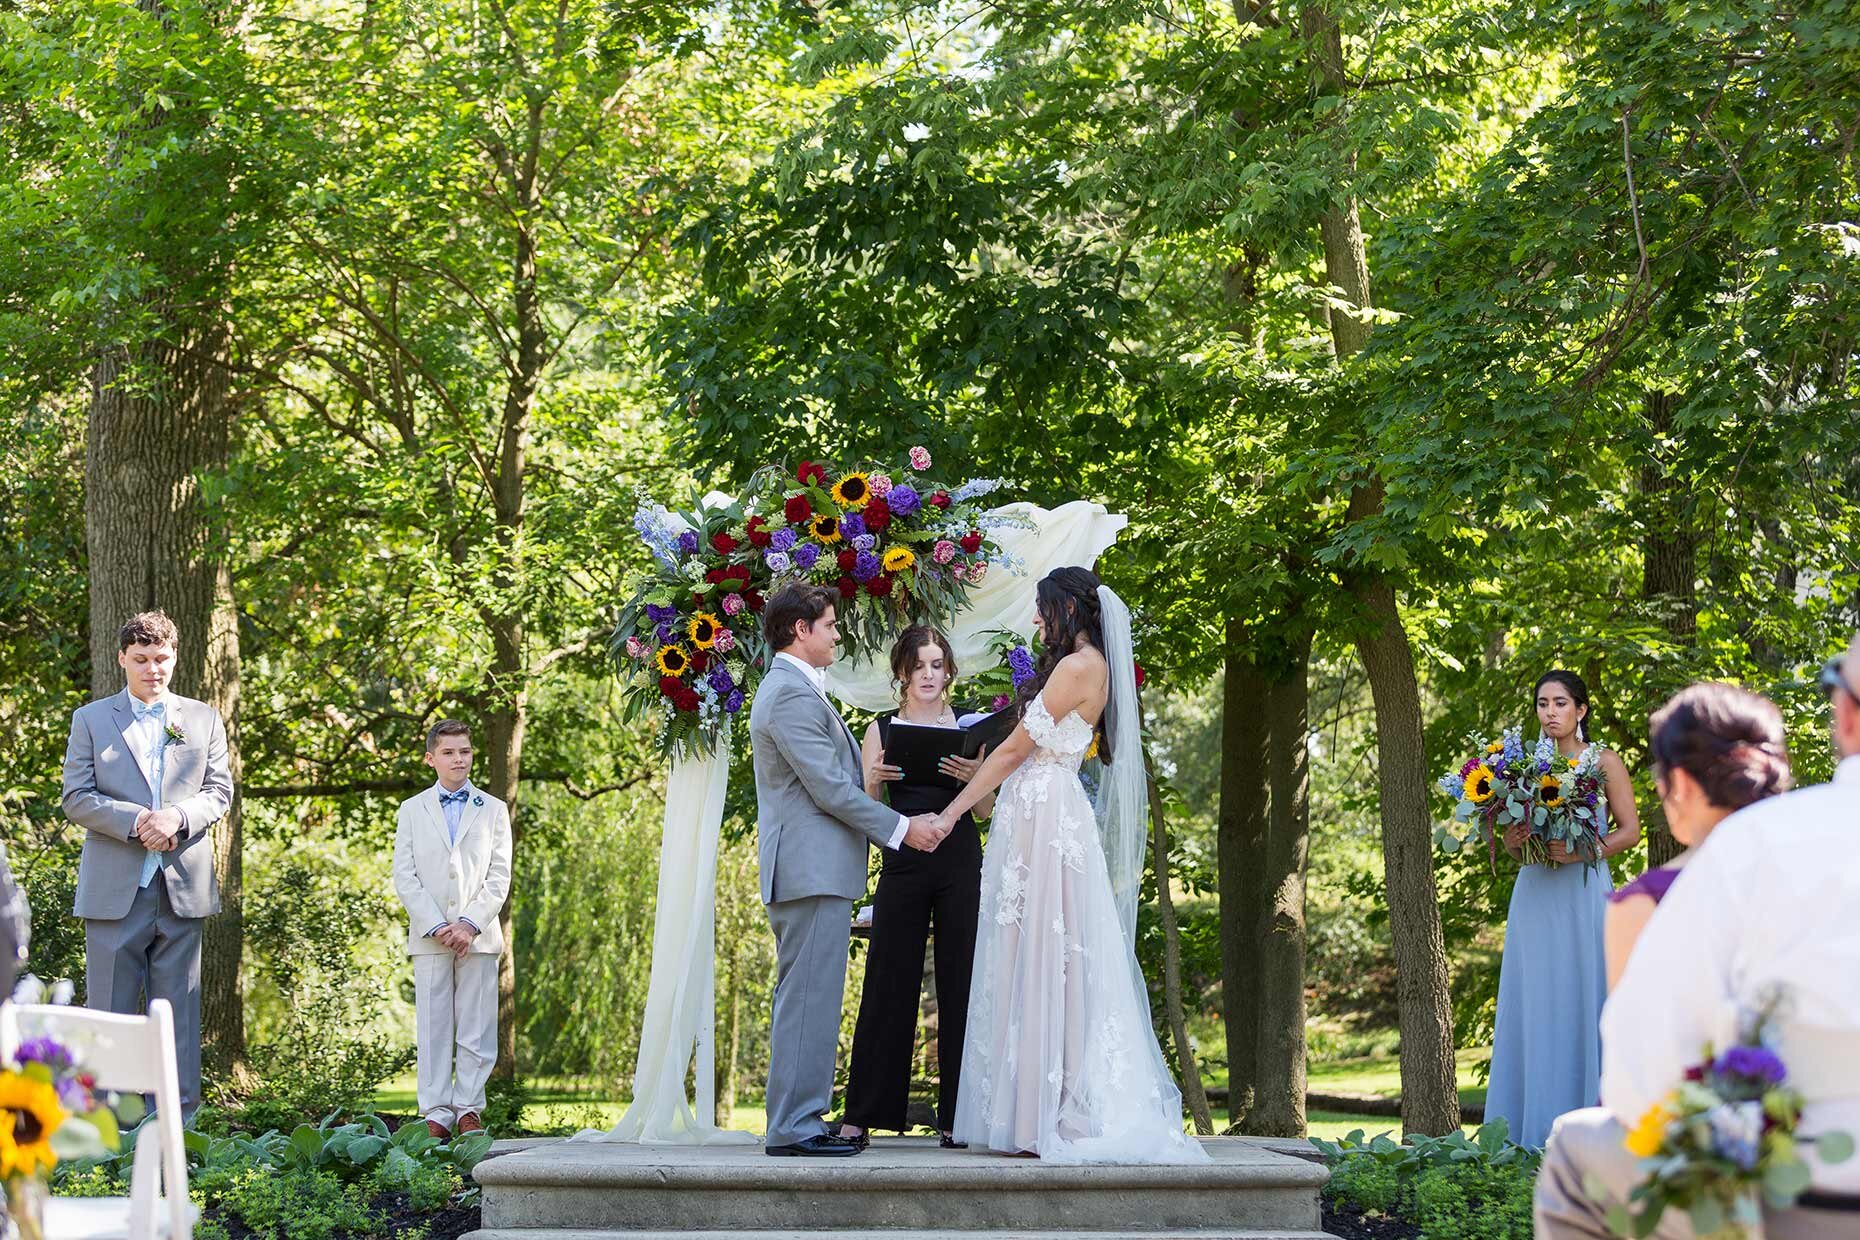 Outdoor ceremony at Cameron Estate Inn